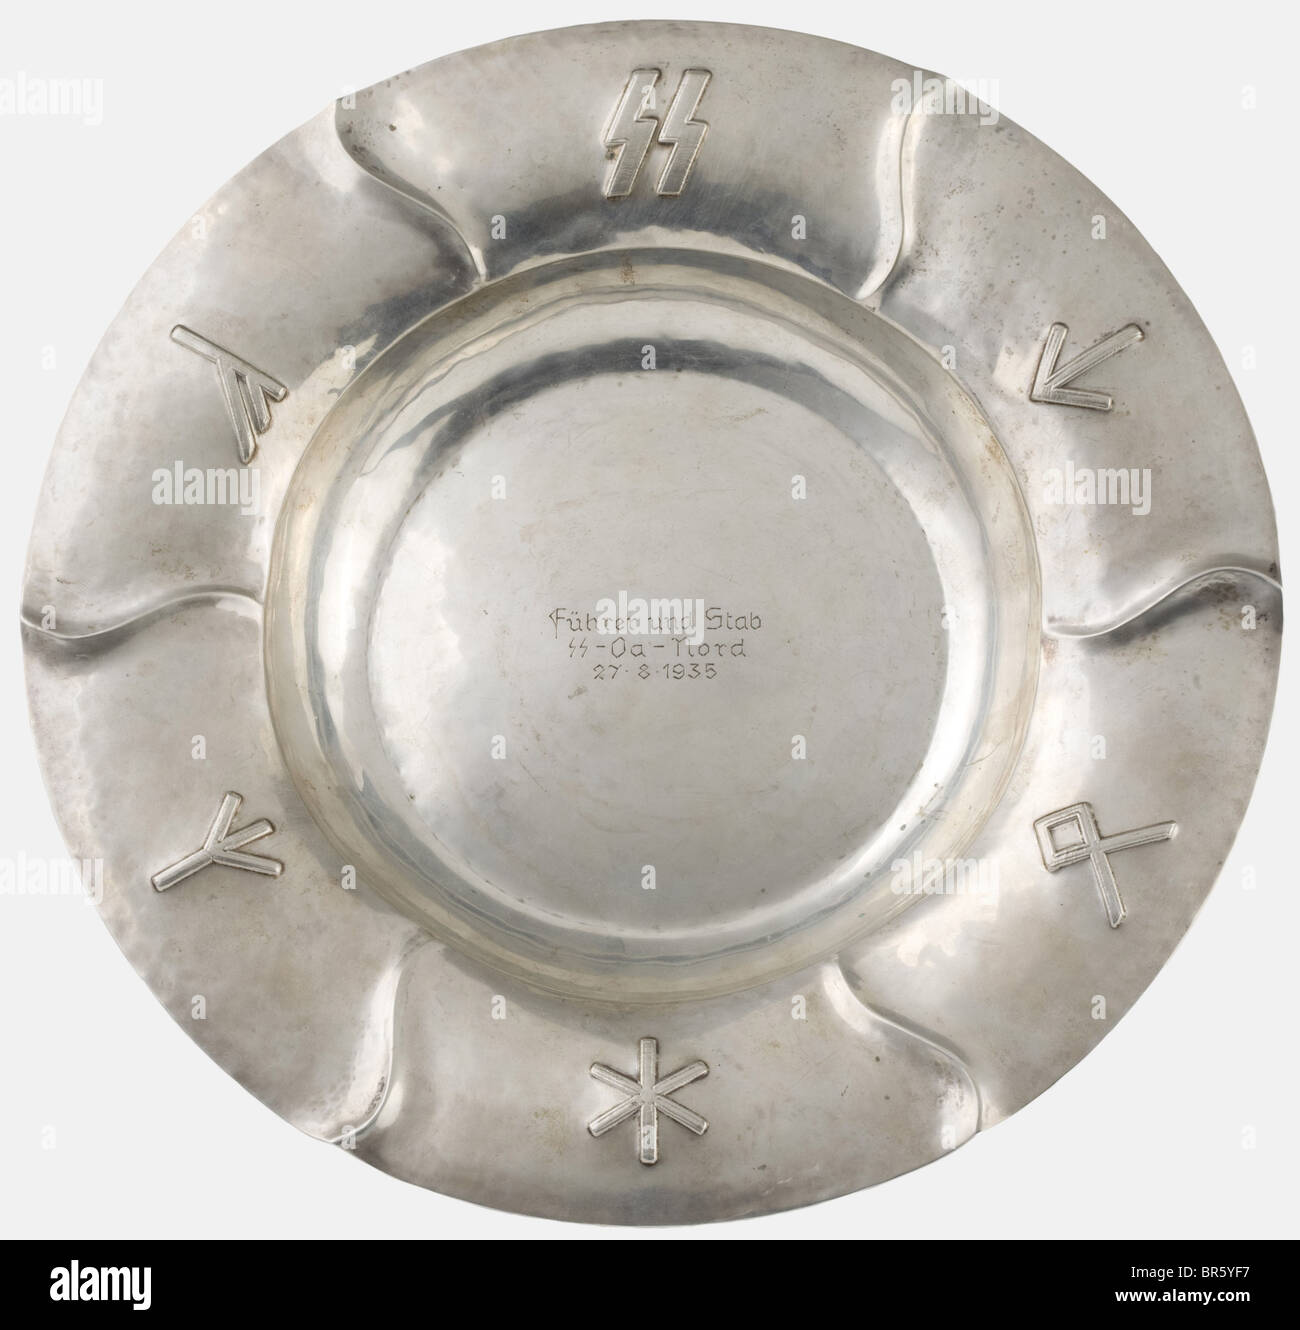 A silver rune-decorated dish, honour gift by SS-Gruppenführer Werner Lorenz Hand-hammered silver with mark of fineness '800 handgehämmert' (hand-hammered) on the bottom. The border displays a series of runes (Sig, Tyr, Odal, Algiz/life rune) in high relief. In the centre the engraved dedication 'Führer und Stab - SS Oa Nord - 27.8.1935' (Commander and Staff - SS Oa North - 27 August 1935). Werner Lorenz (1891 - 1974) was assigned as Commander, SS-Oberabschnitt Nord (northern superior district) from February 1934 to March 1937 with his office located in Hamburg., Stock Photo